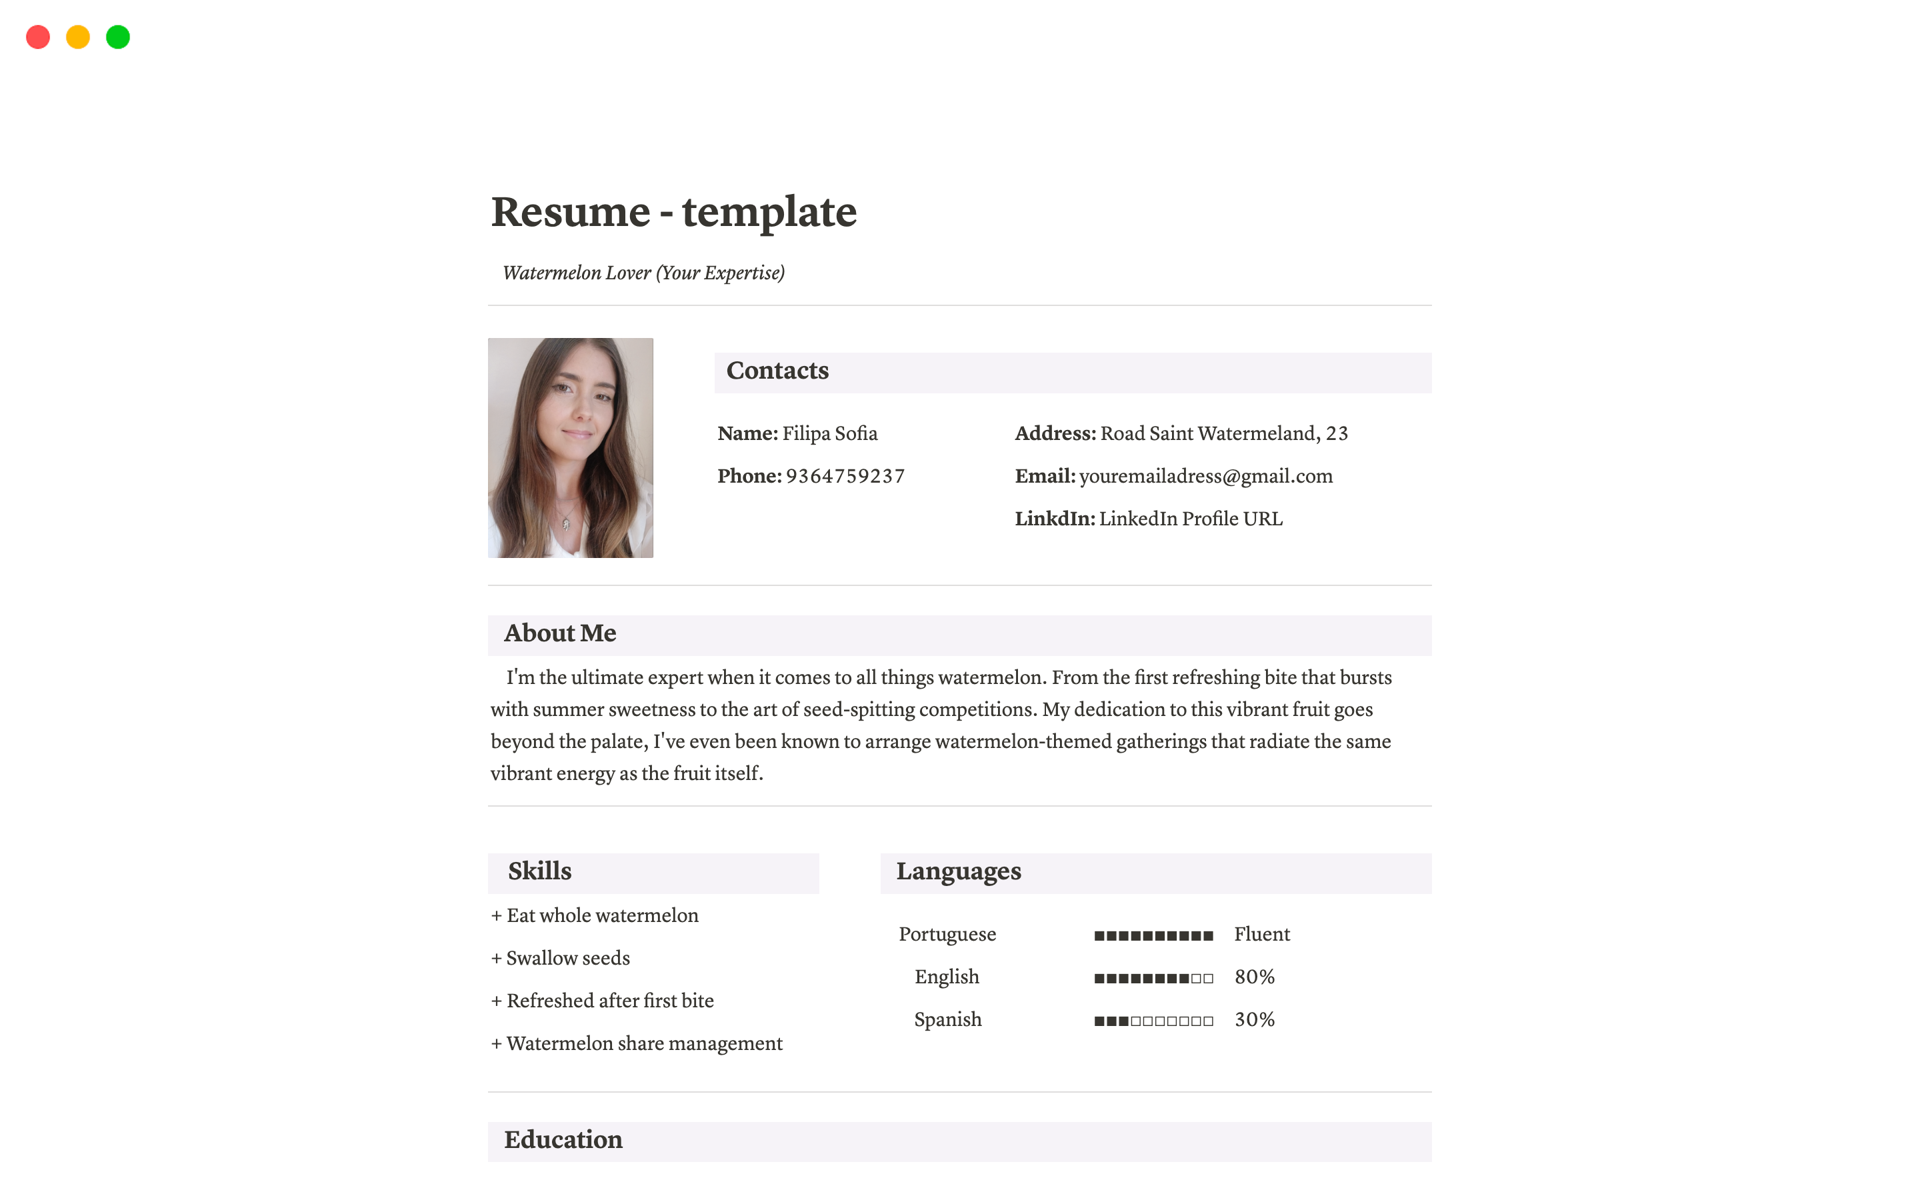 Create a simple Resume on Notion